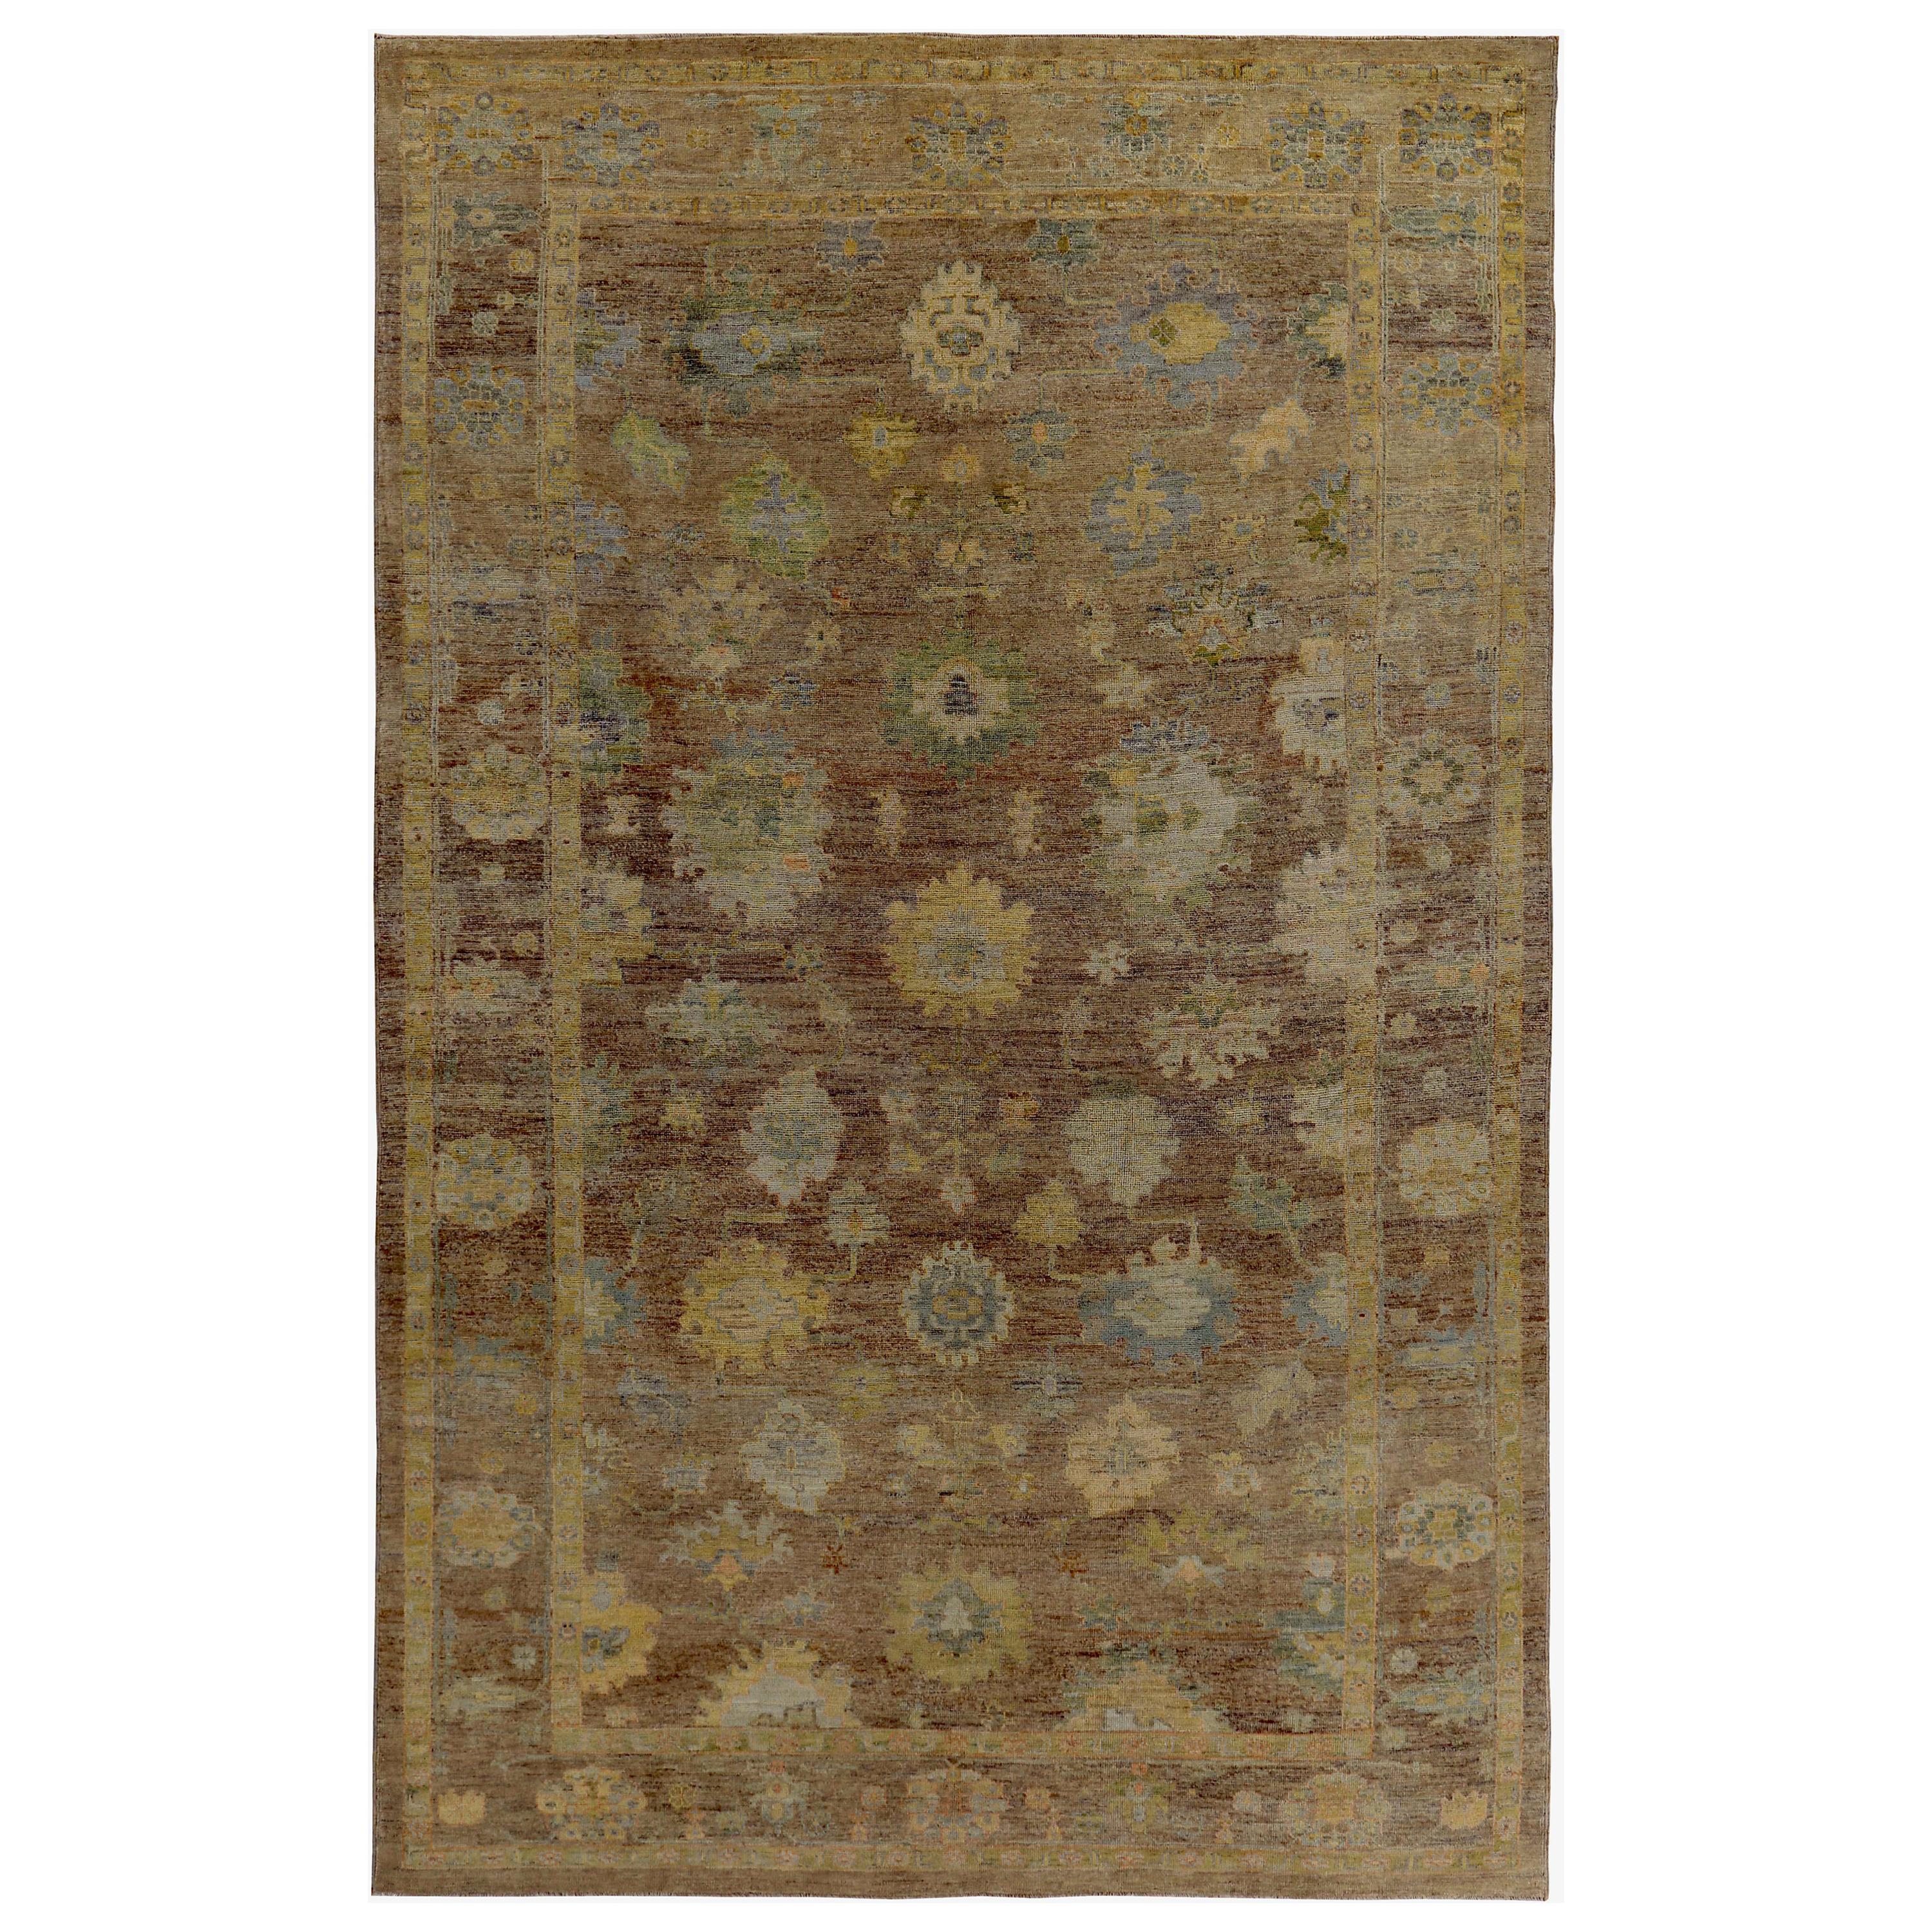 Turkish Oushak Rug with Yellow, Green and Blue Flower Heads on Brown Field